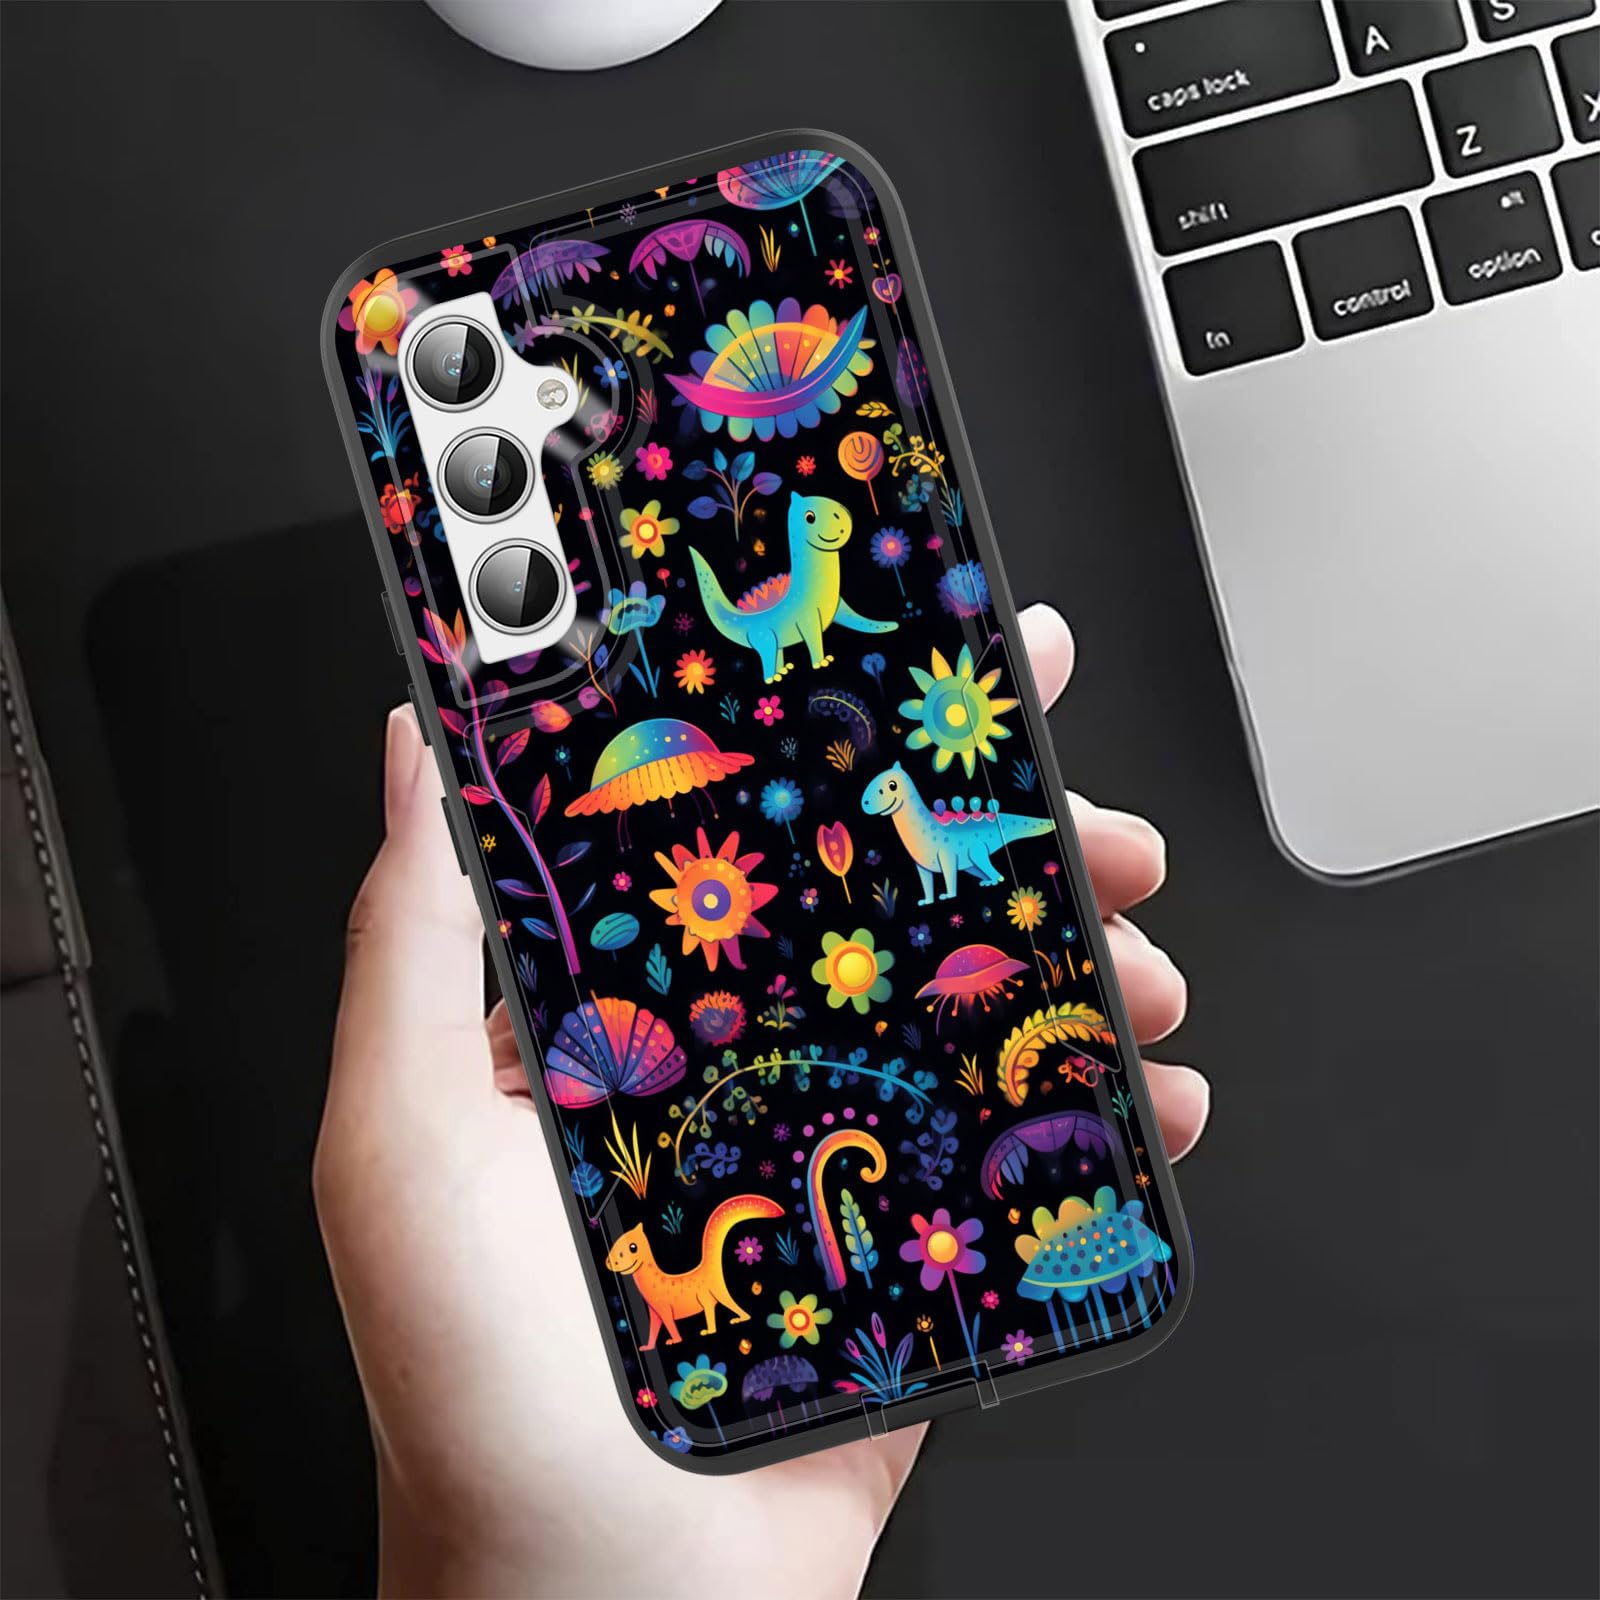 BFUKVOU for Galaxy A54 5G Case,Dual Layer Hybrid (Magnetic Mount Friendly) Shockproof Drop Protection Impact Phone Cover Case for Samsung Galaxy A54 5G 6.4 inch,Cute Joyful Dinosaur